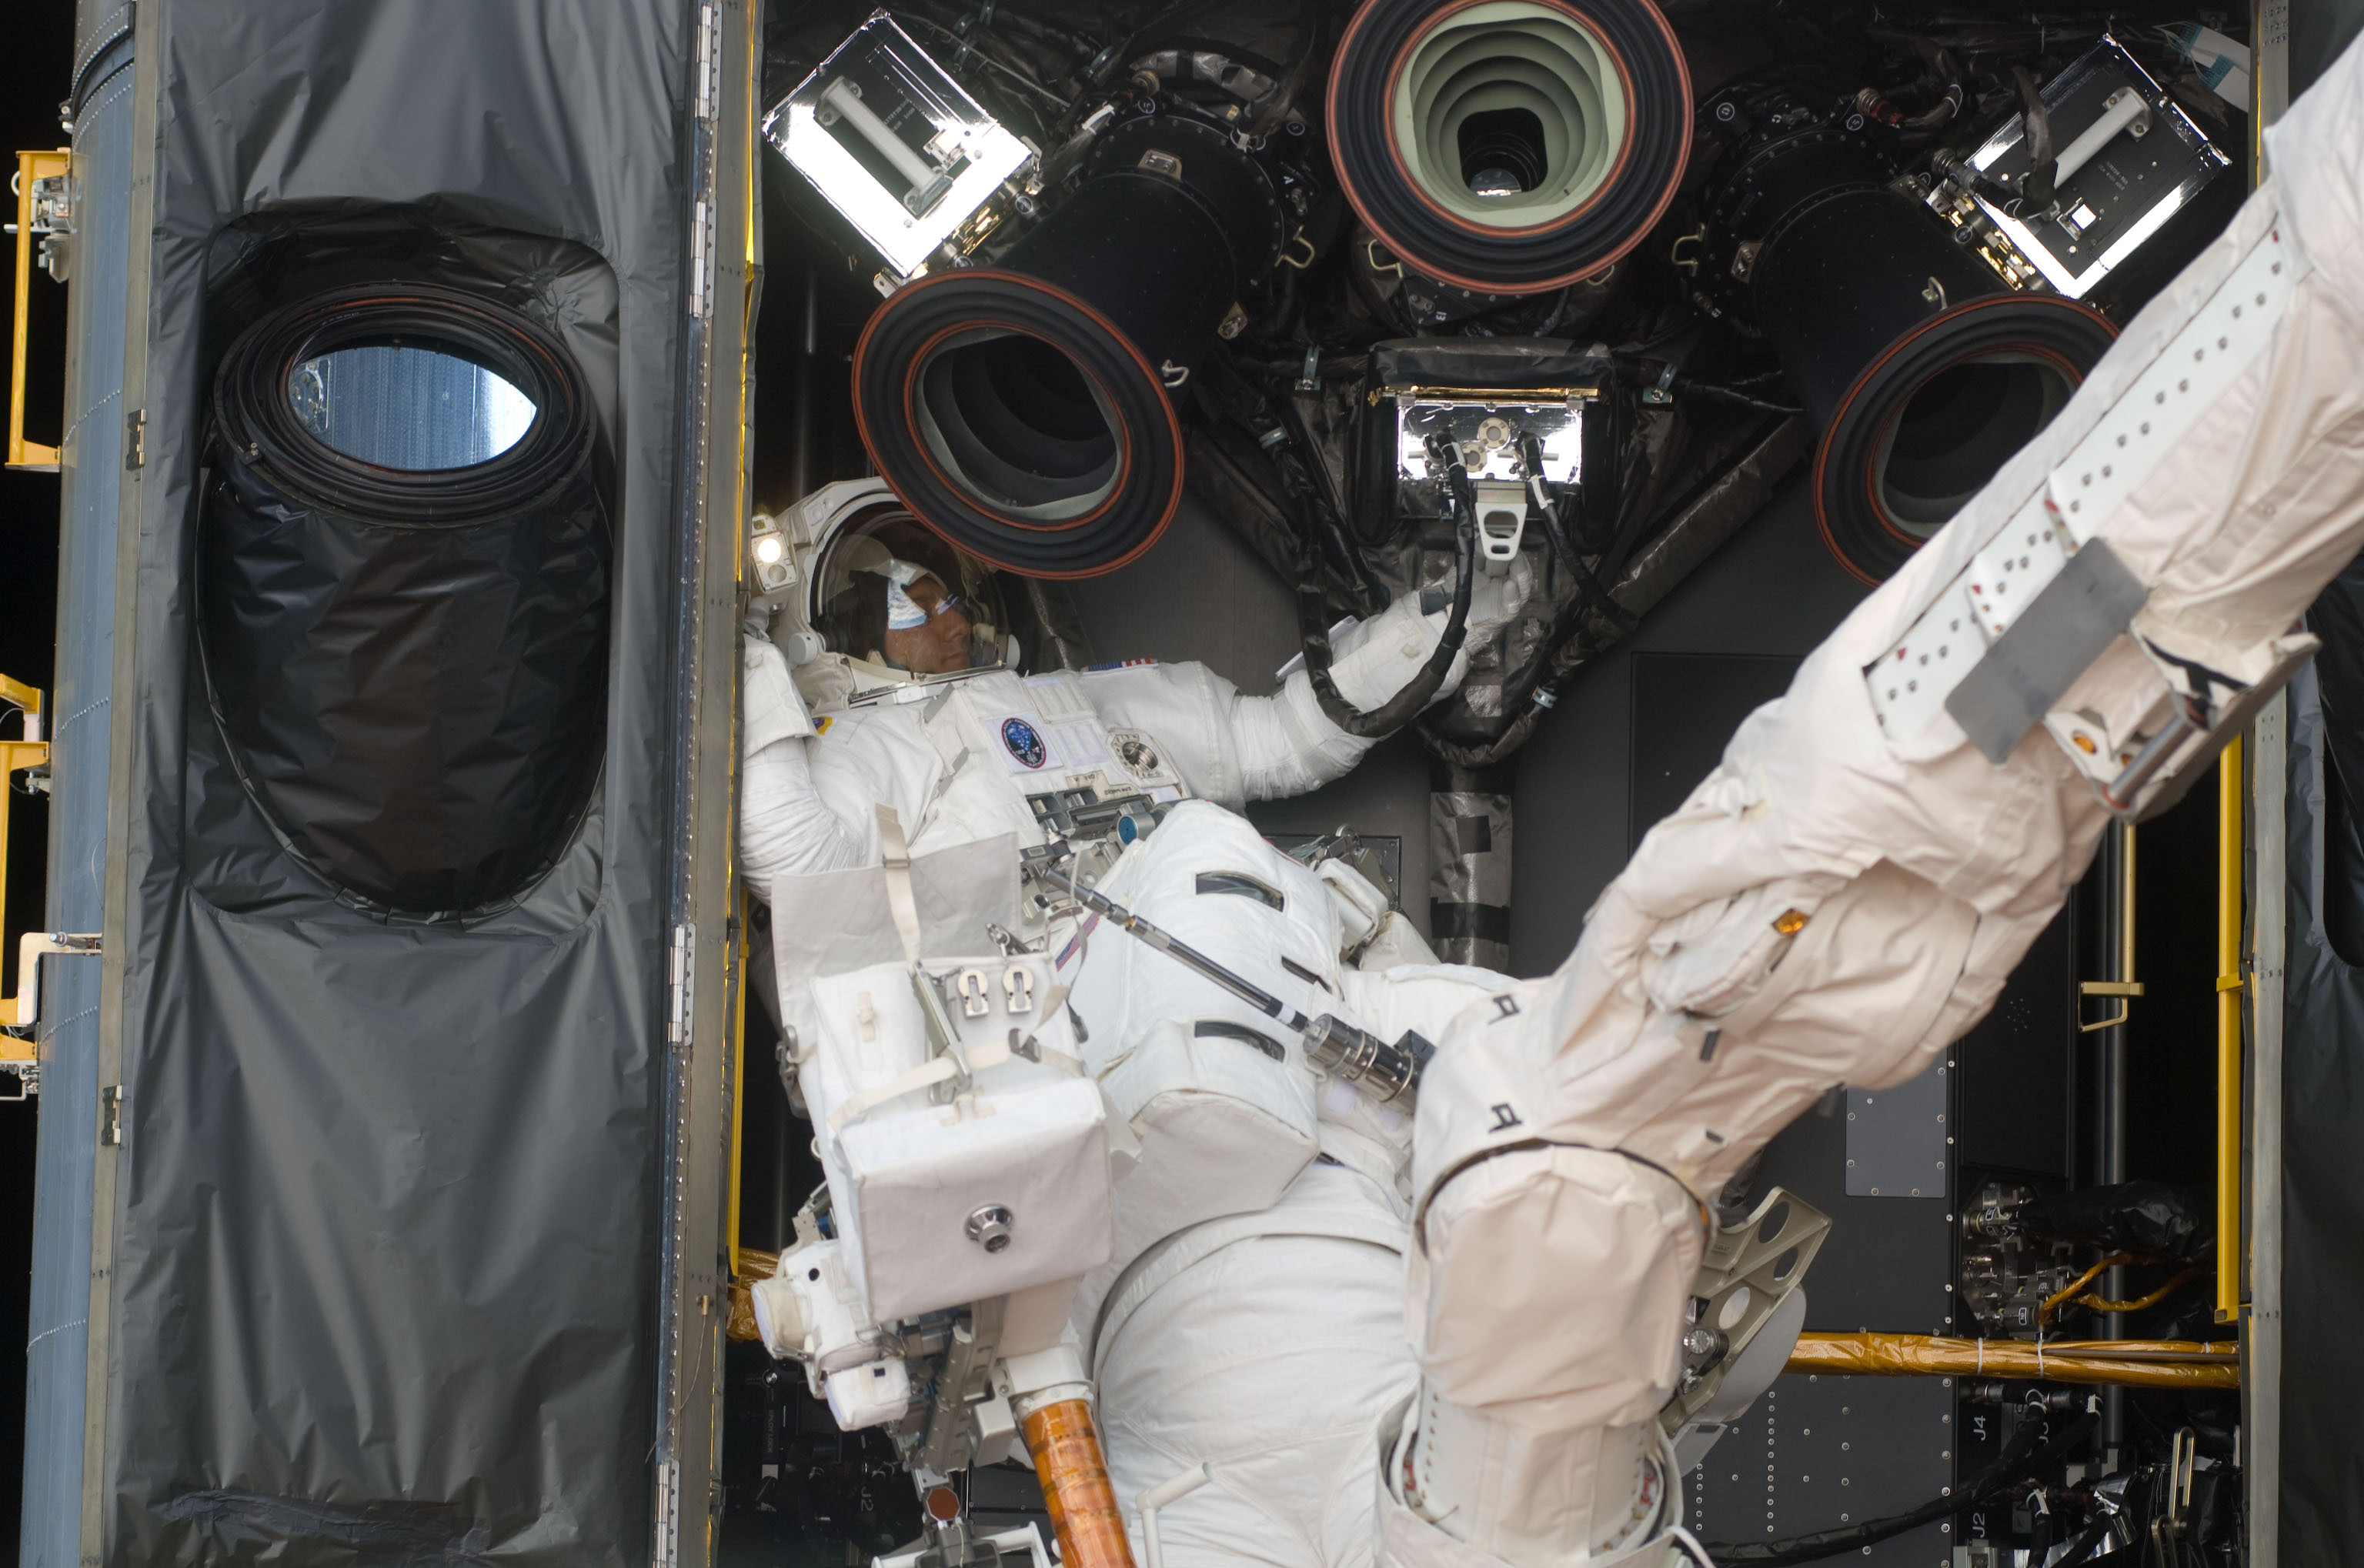 Two astronauts work on changing out Rate Sensor Units - boxes that hold two gyroscopes - in the aft shroud (bottom) of Hubble.